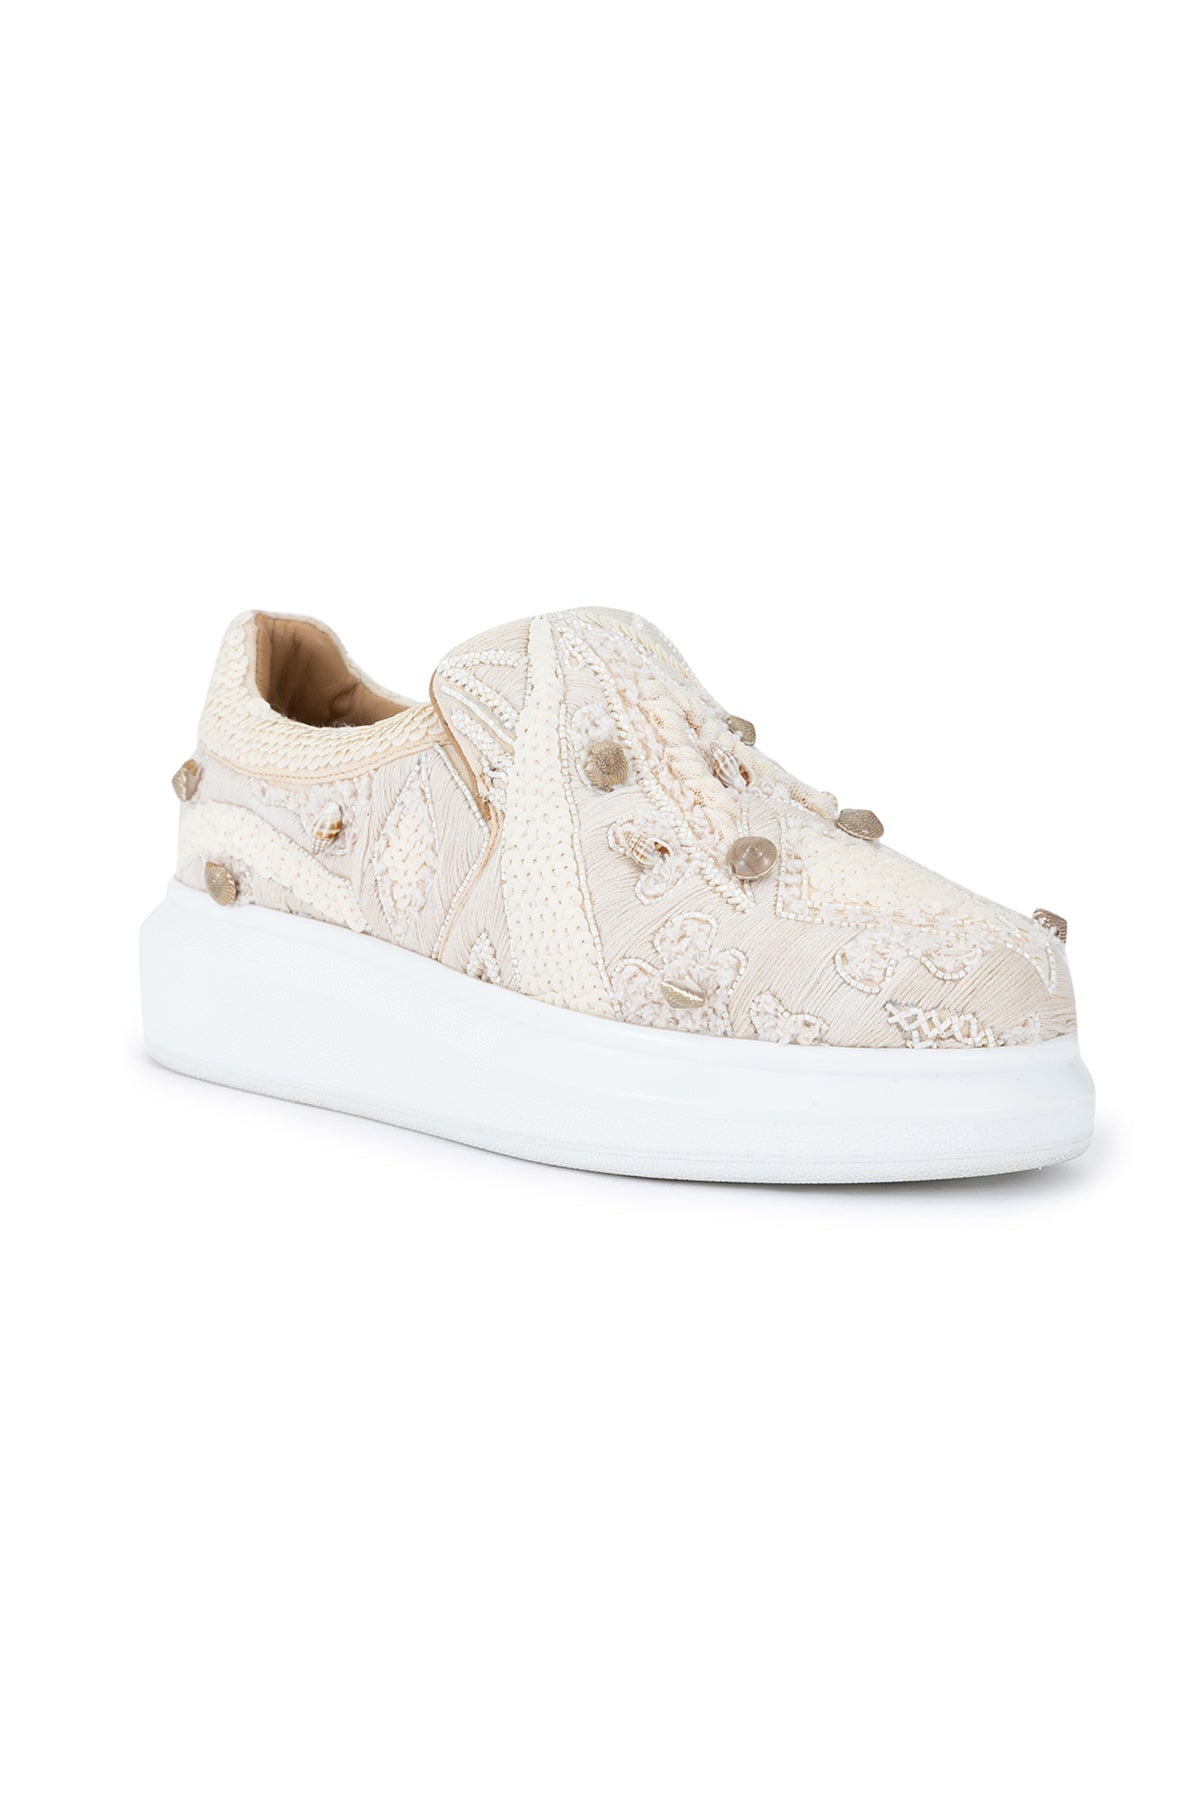 Paradise Classic Sneakers Dream of Tropical Leisure